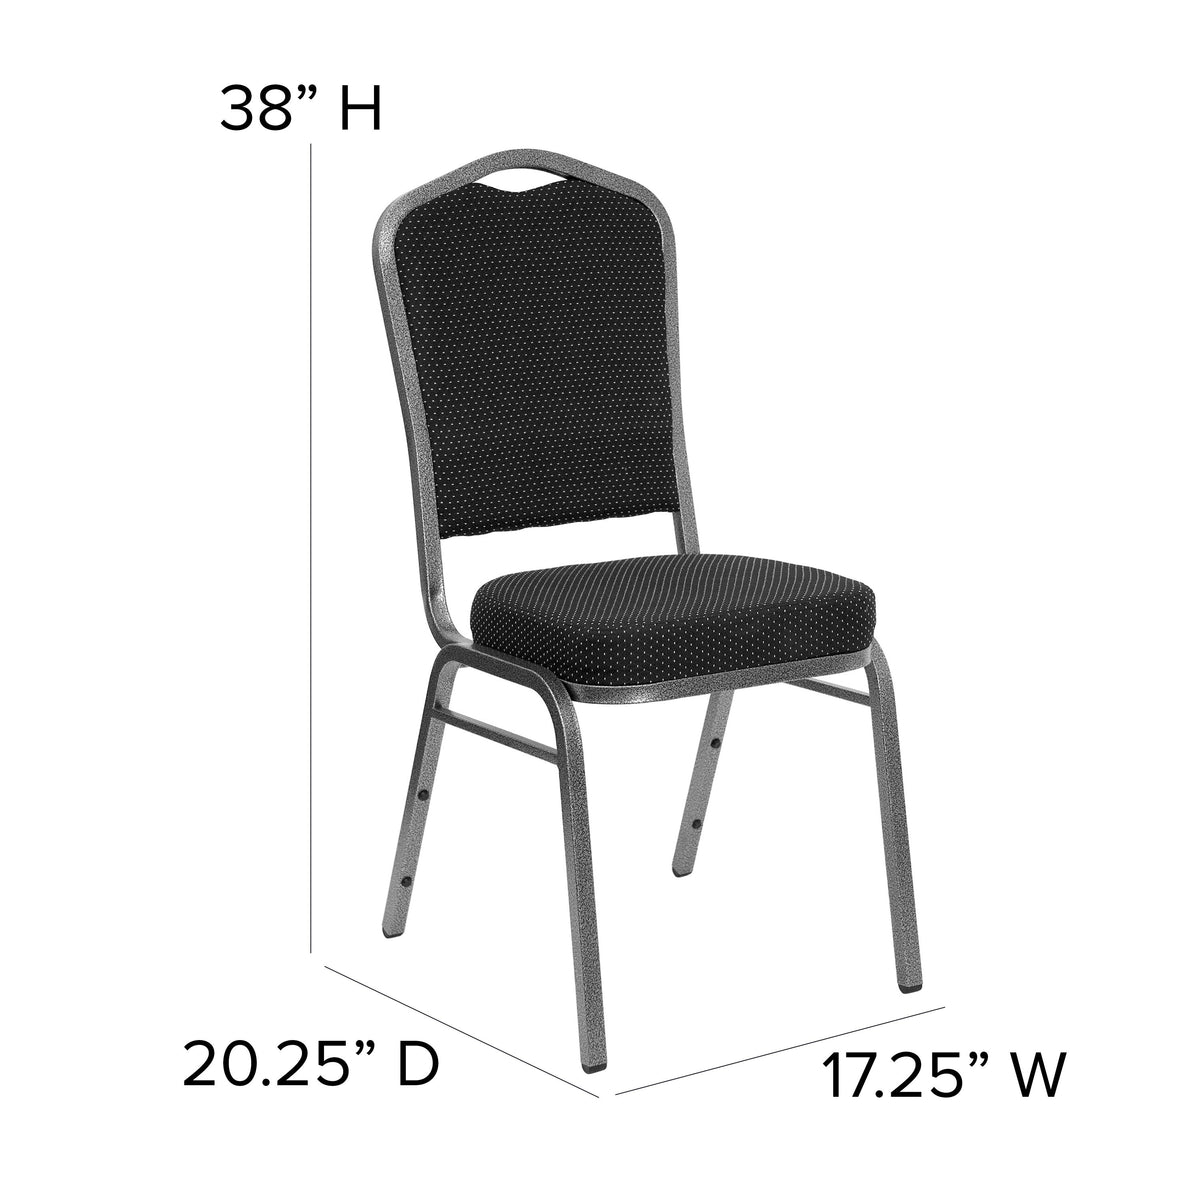 Black Dot Patterned Fabric/Silver Vein Frame |#| Crown Back Banquet Stack Chair in Black Dot Patterned Fabric - Silver Vein Frame